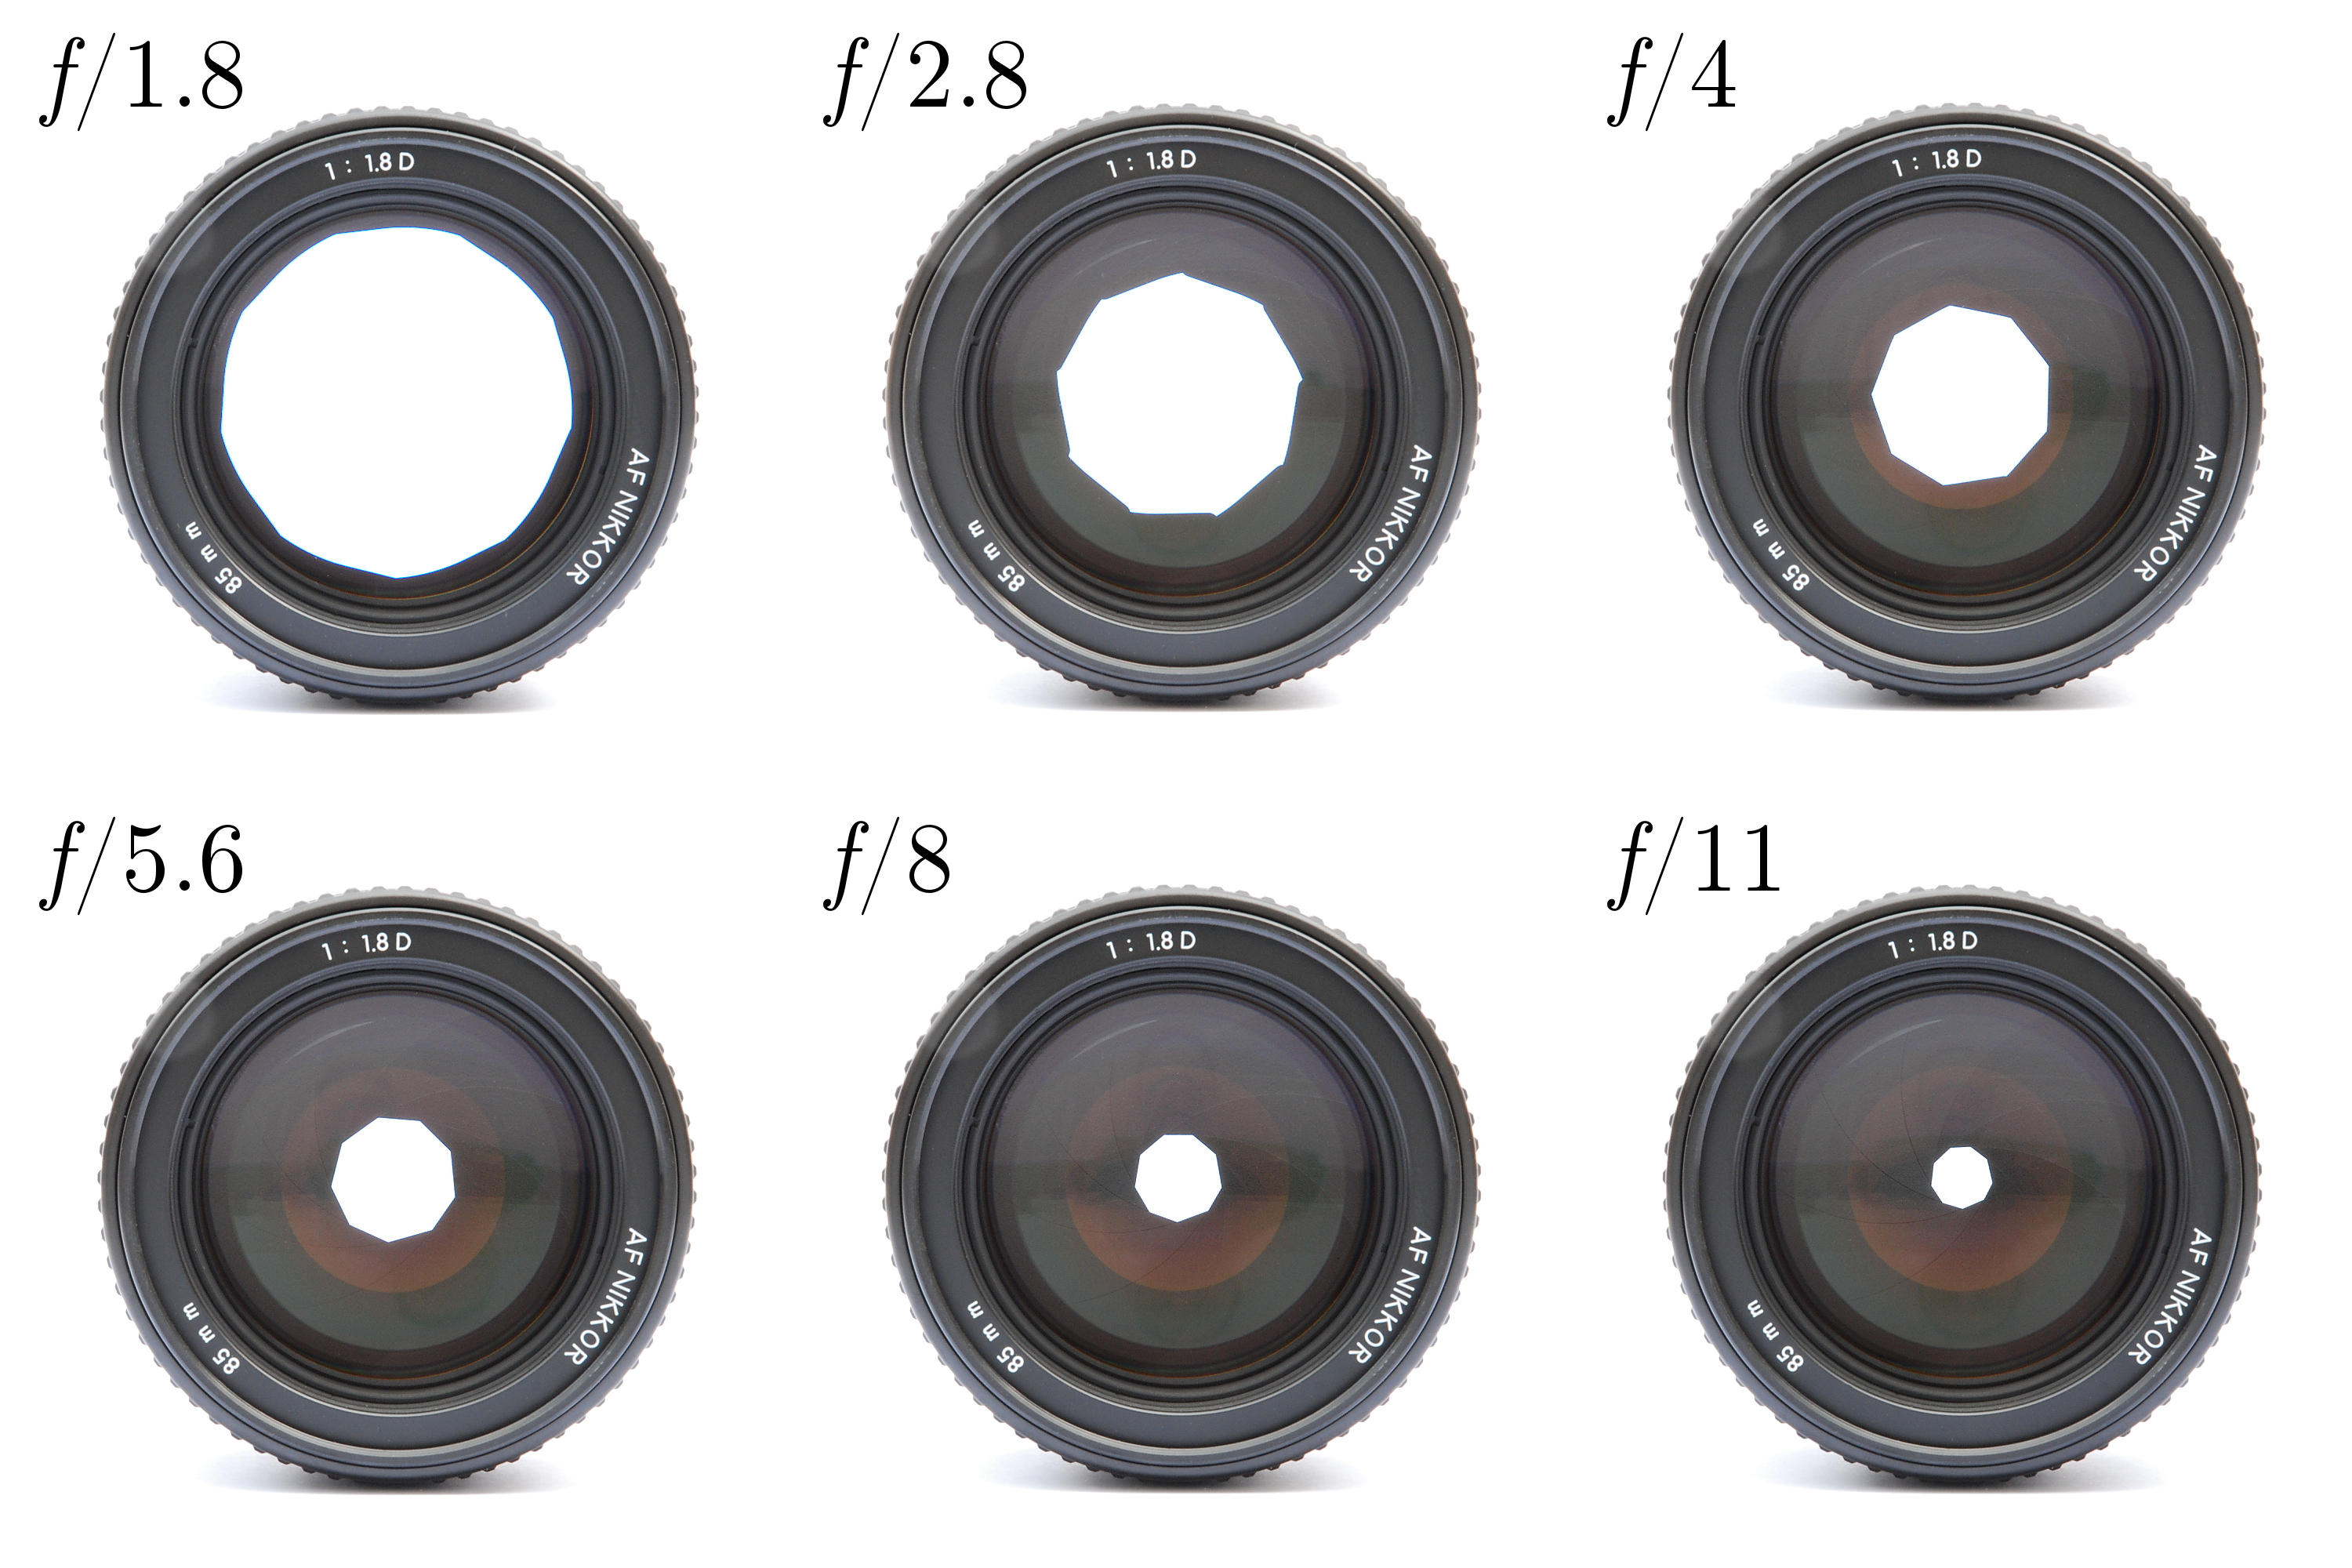 Lenses with different apetures